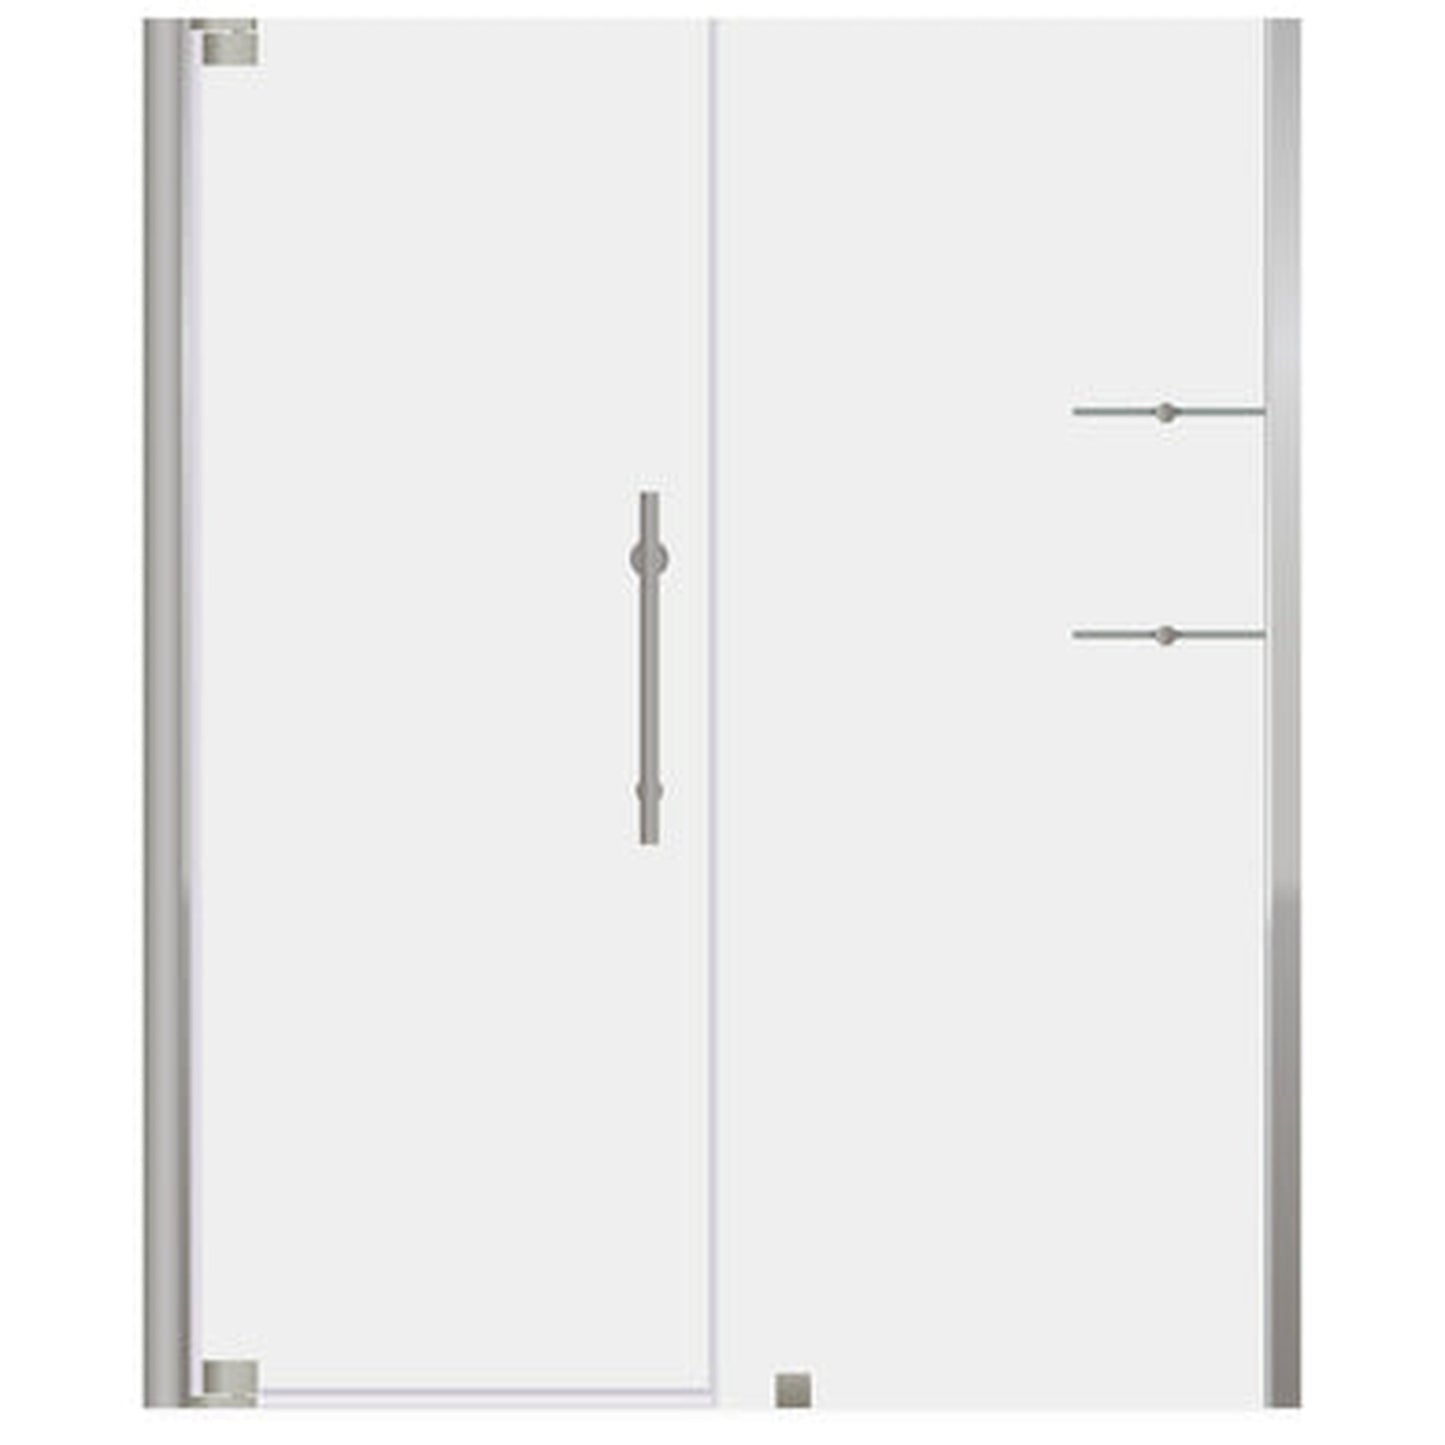 LessCare Ultra-G 58-60" x 72" Brushed Nickel Swing-Out Shower Door